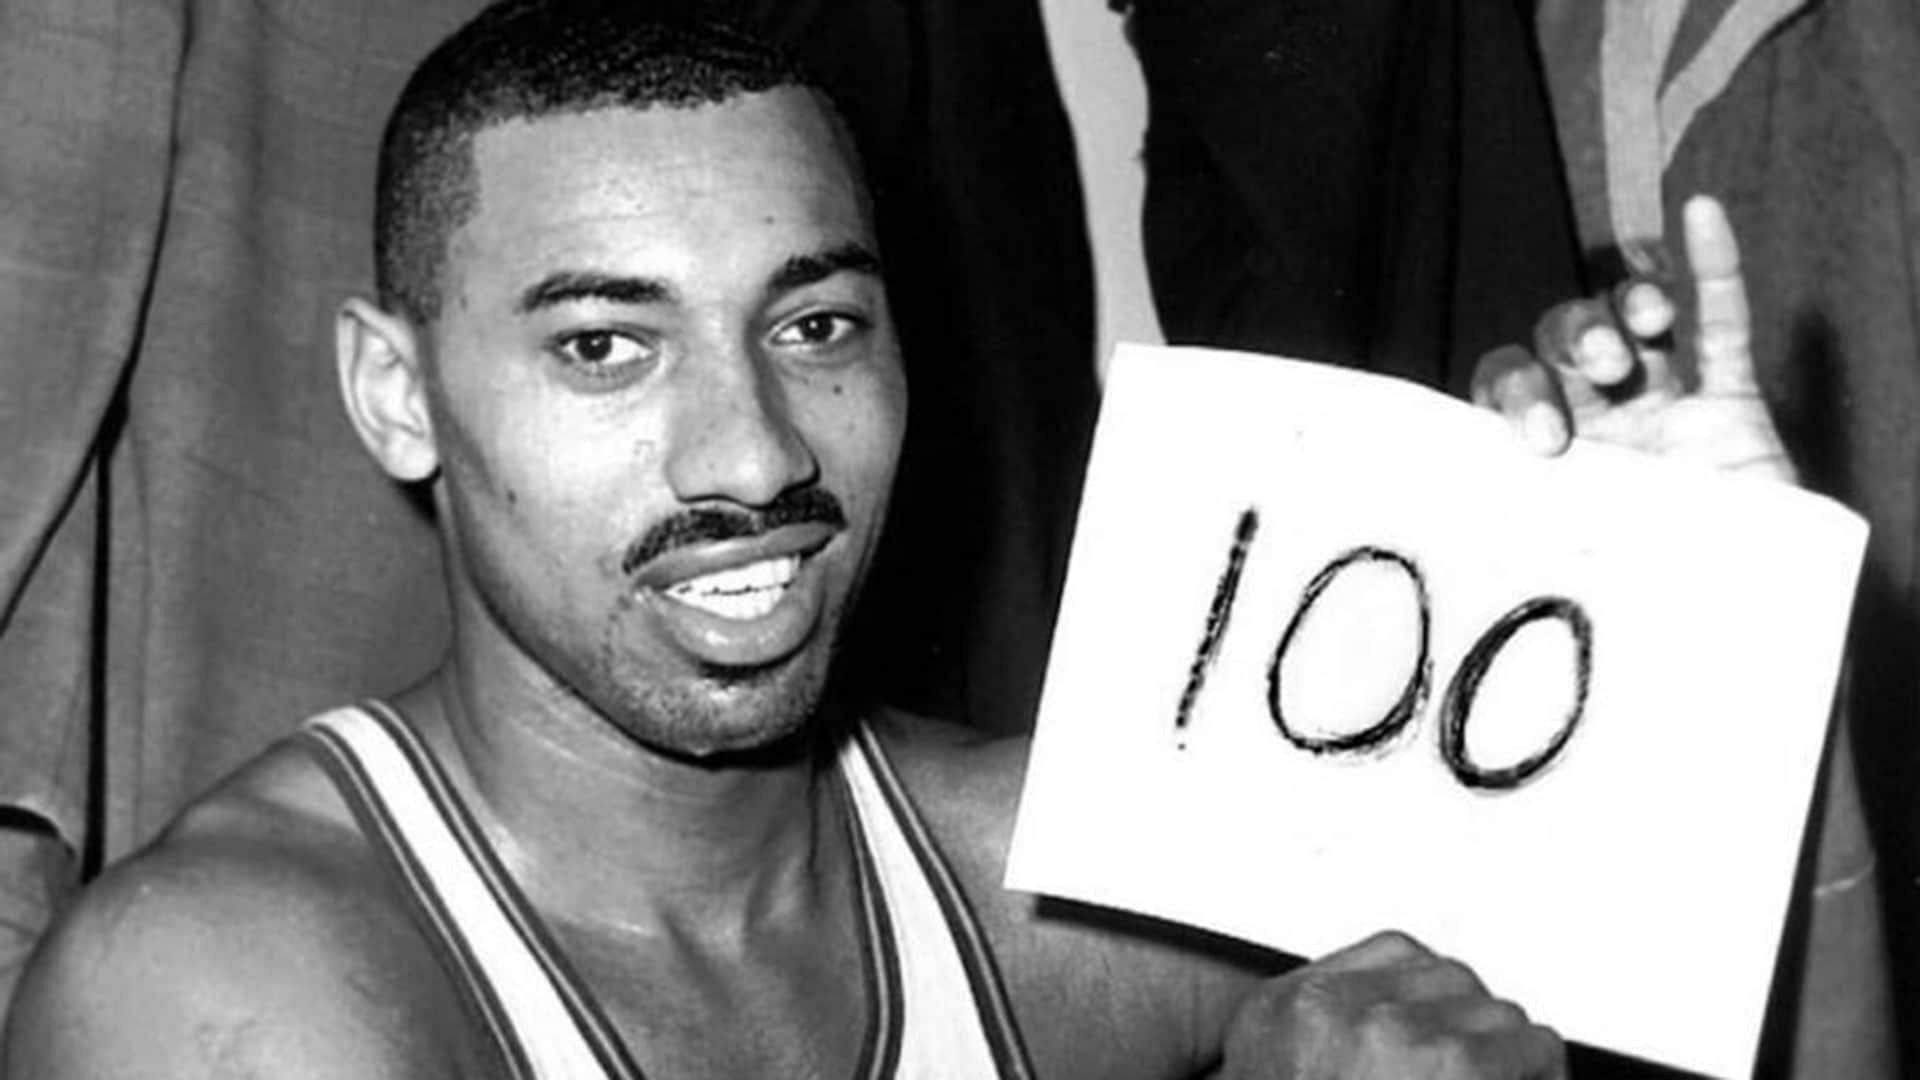 Wilt Chamberlain scored 100 points in a game. (Photo: NBA.com)